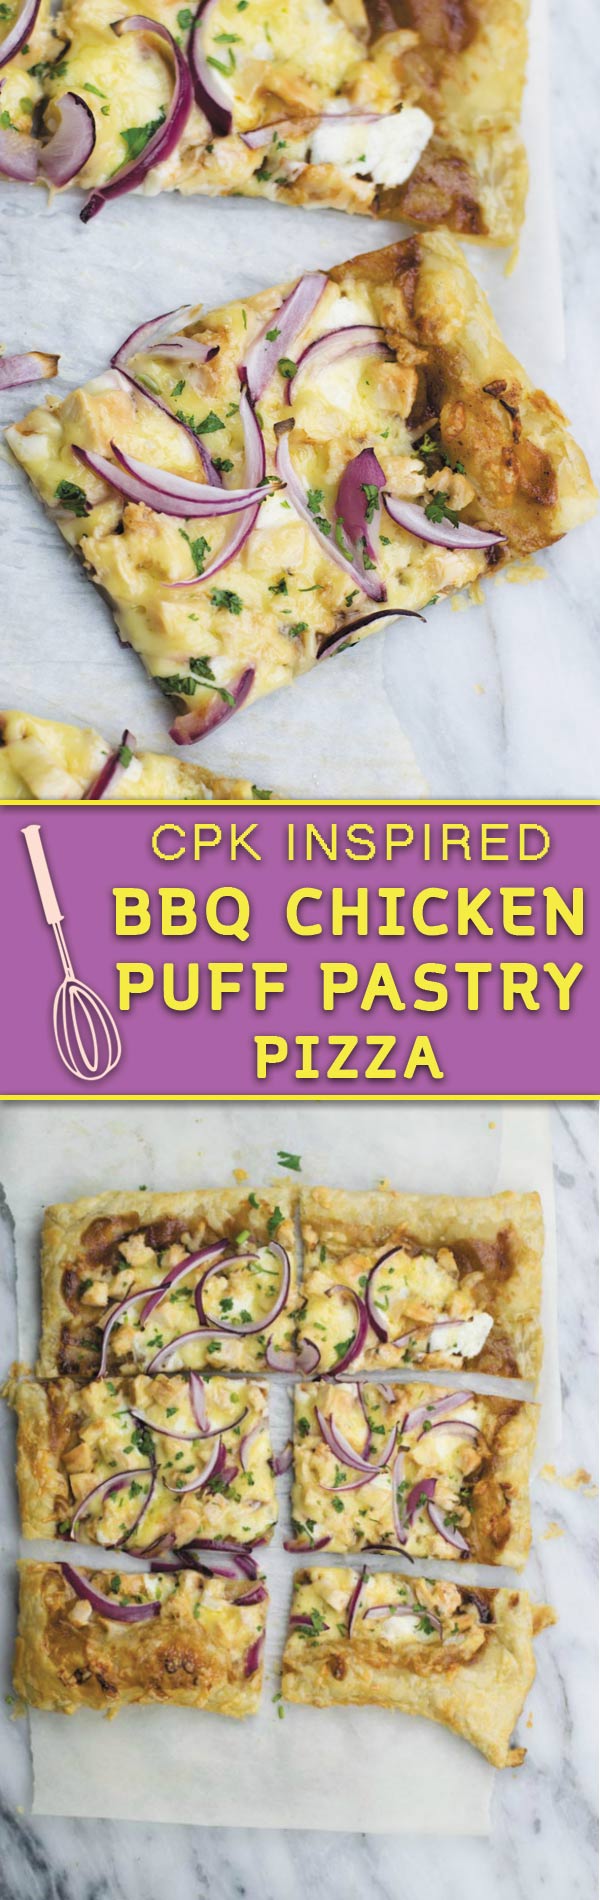 cpk inspired bbq chicken puff pastry pizza - Easy 30 MINS CPK copycat pizza. Use either puff pastry or homemade pizza crust!